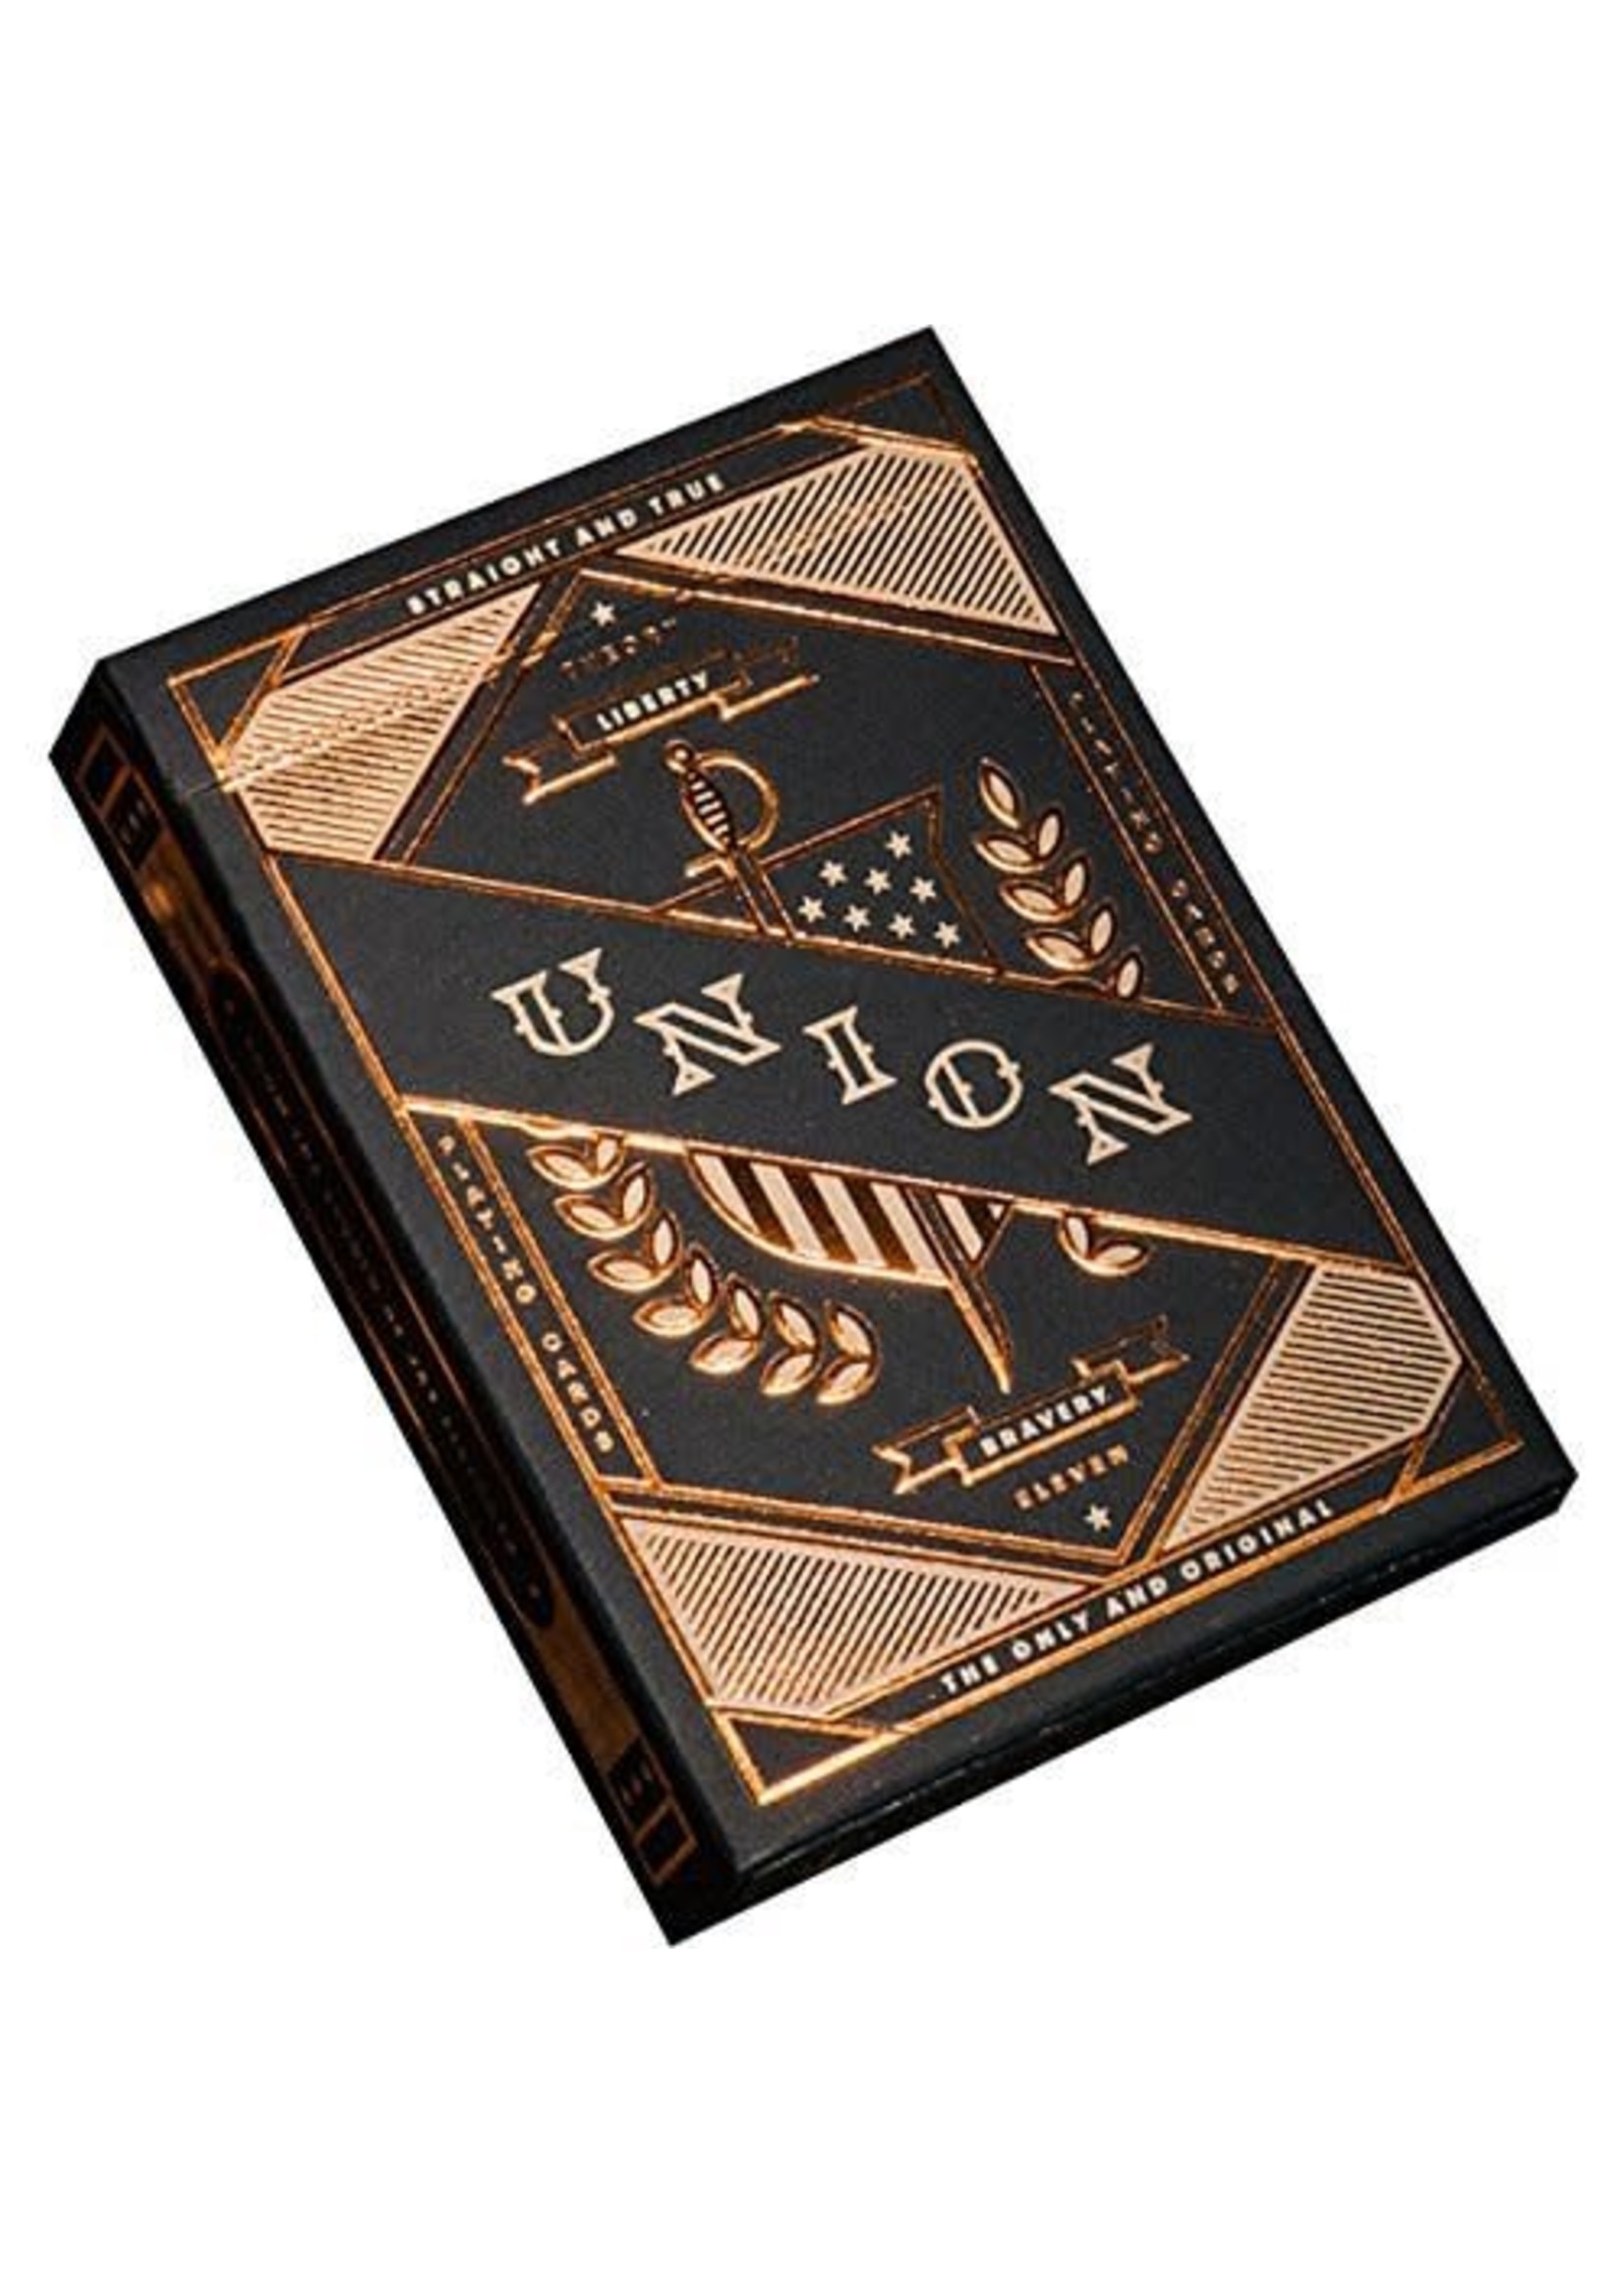 Theory11 Theory11:  Union Playing Cards